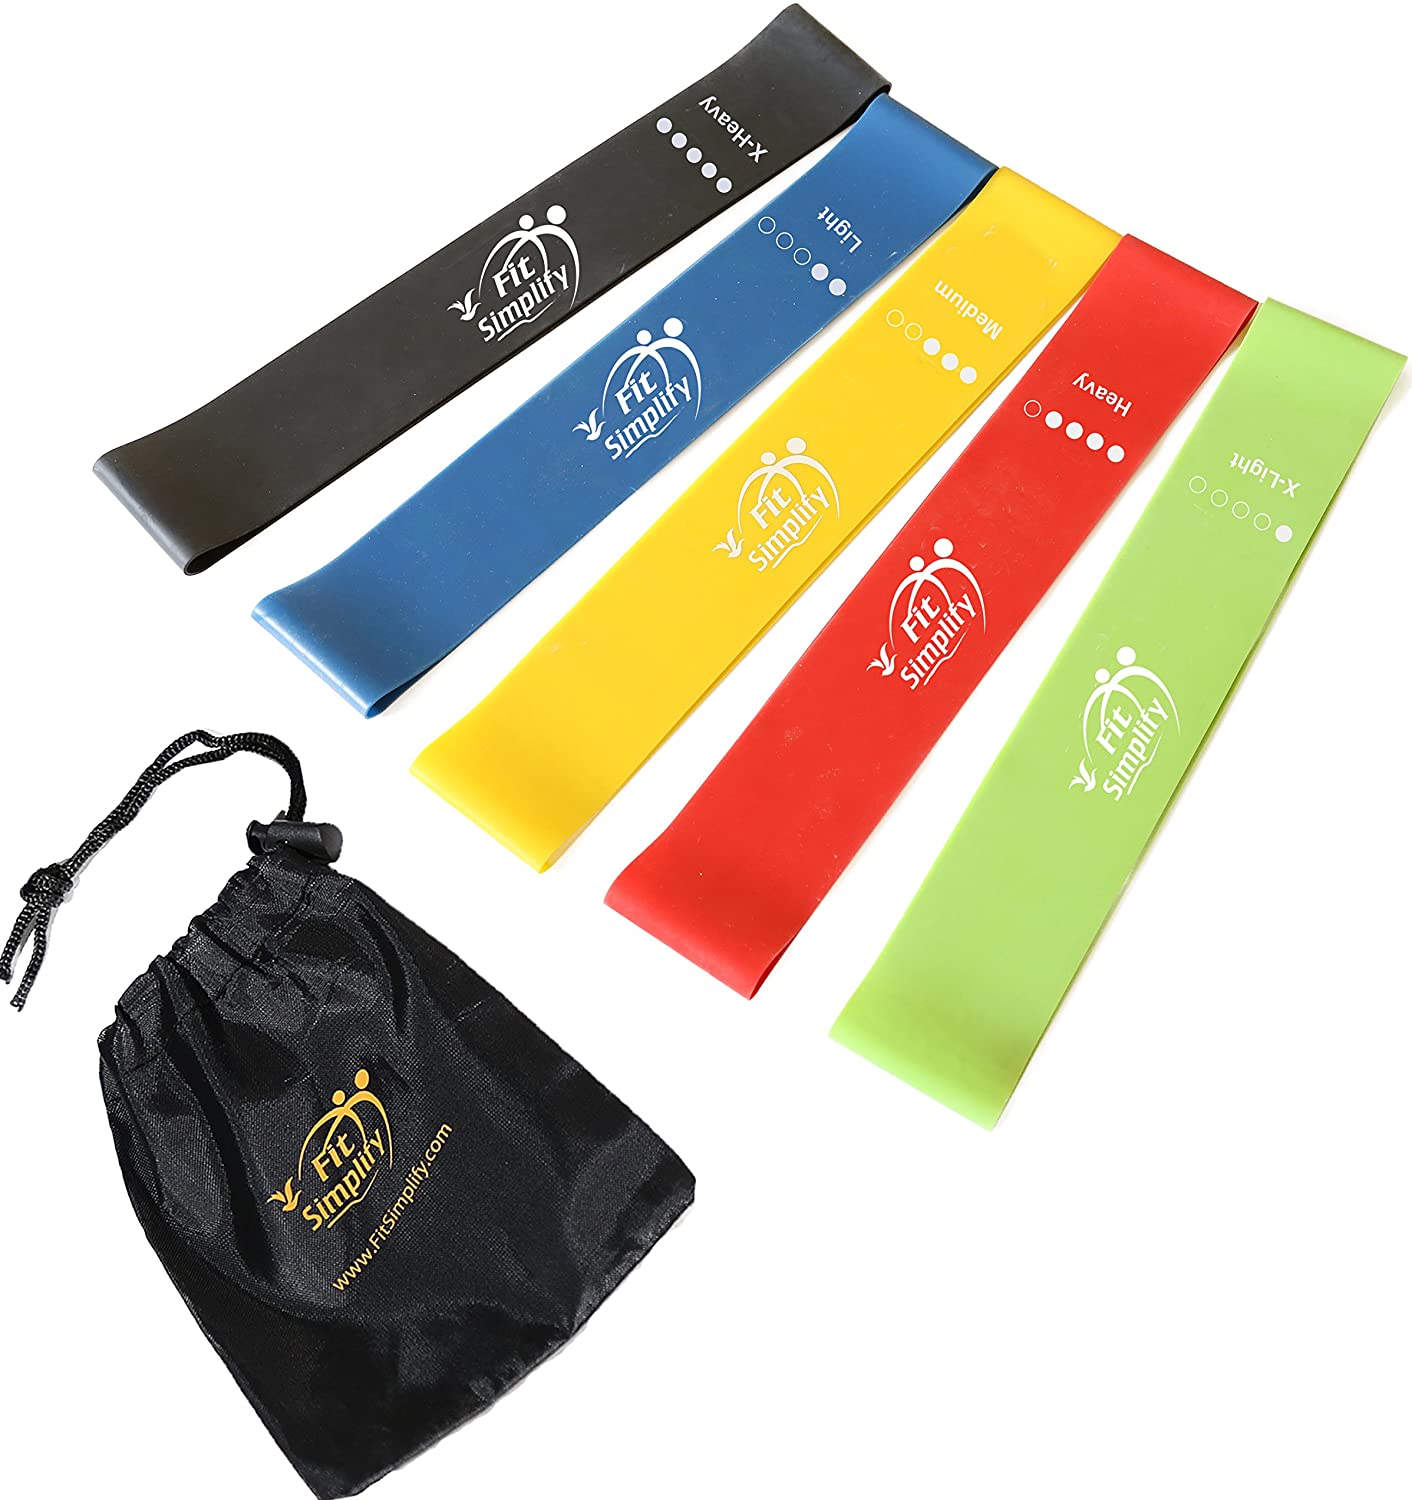 resistance bands, fitness on the go, gift ideas for travelers, how to stay fit on the go